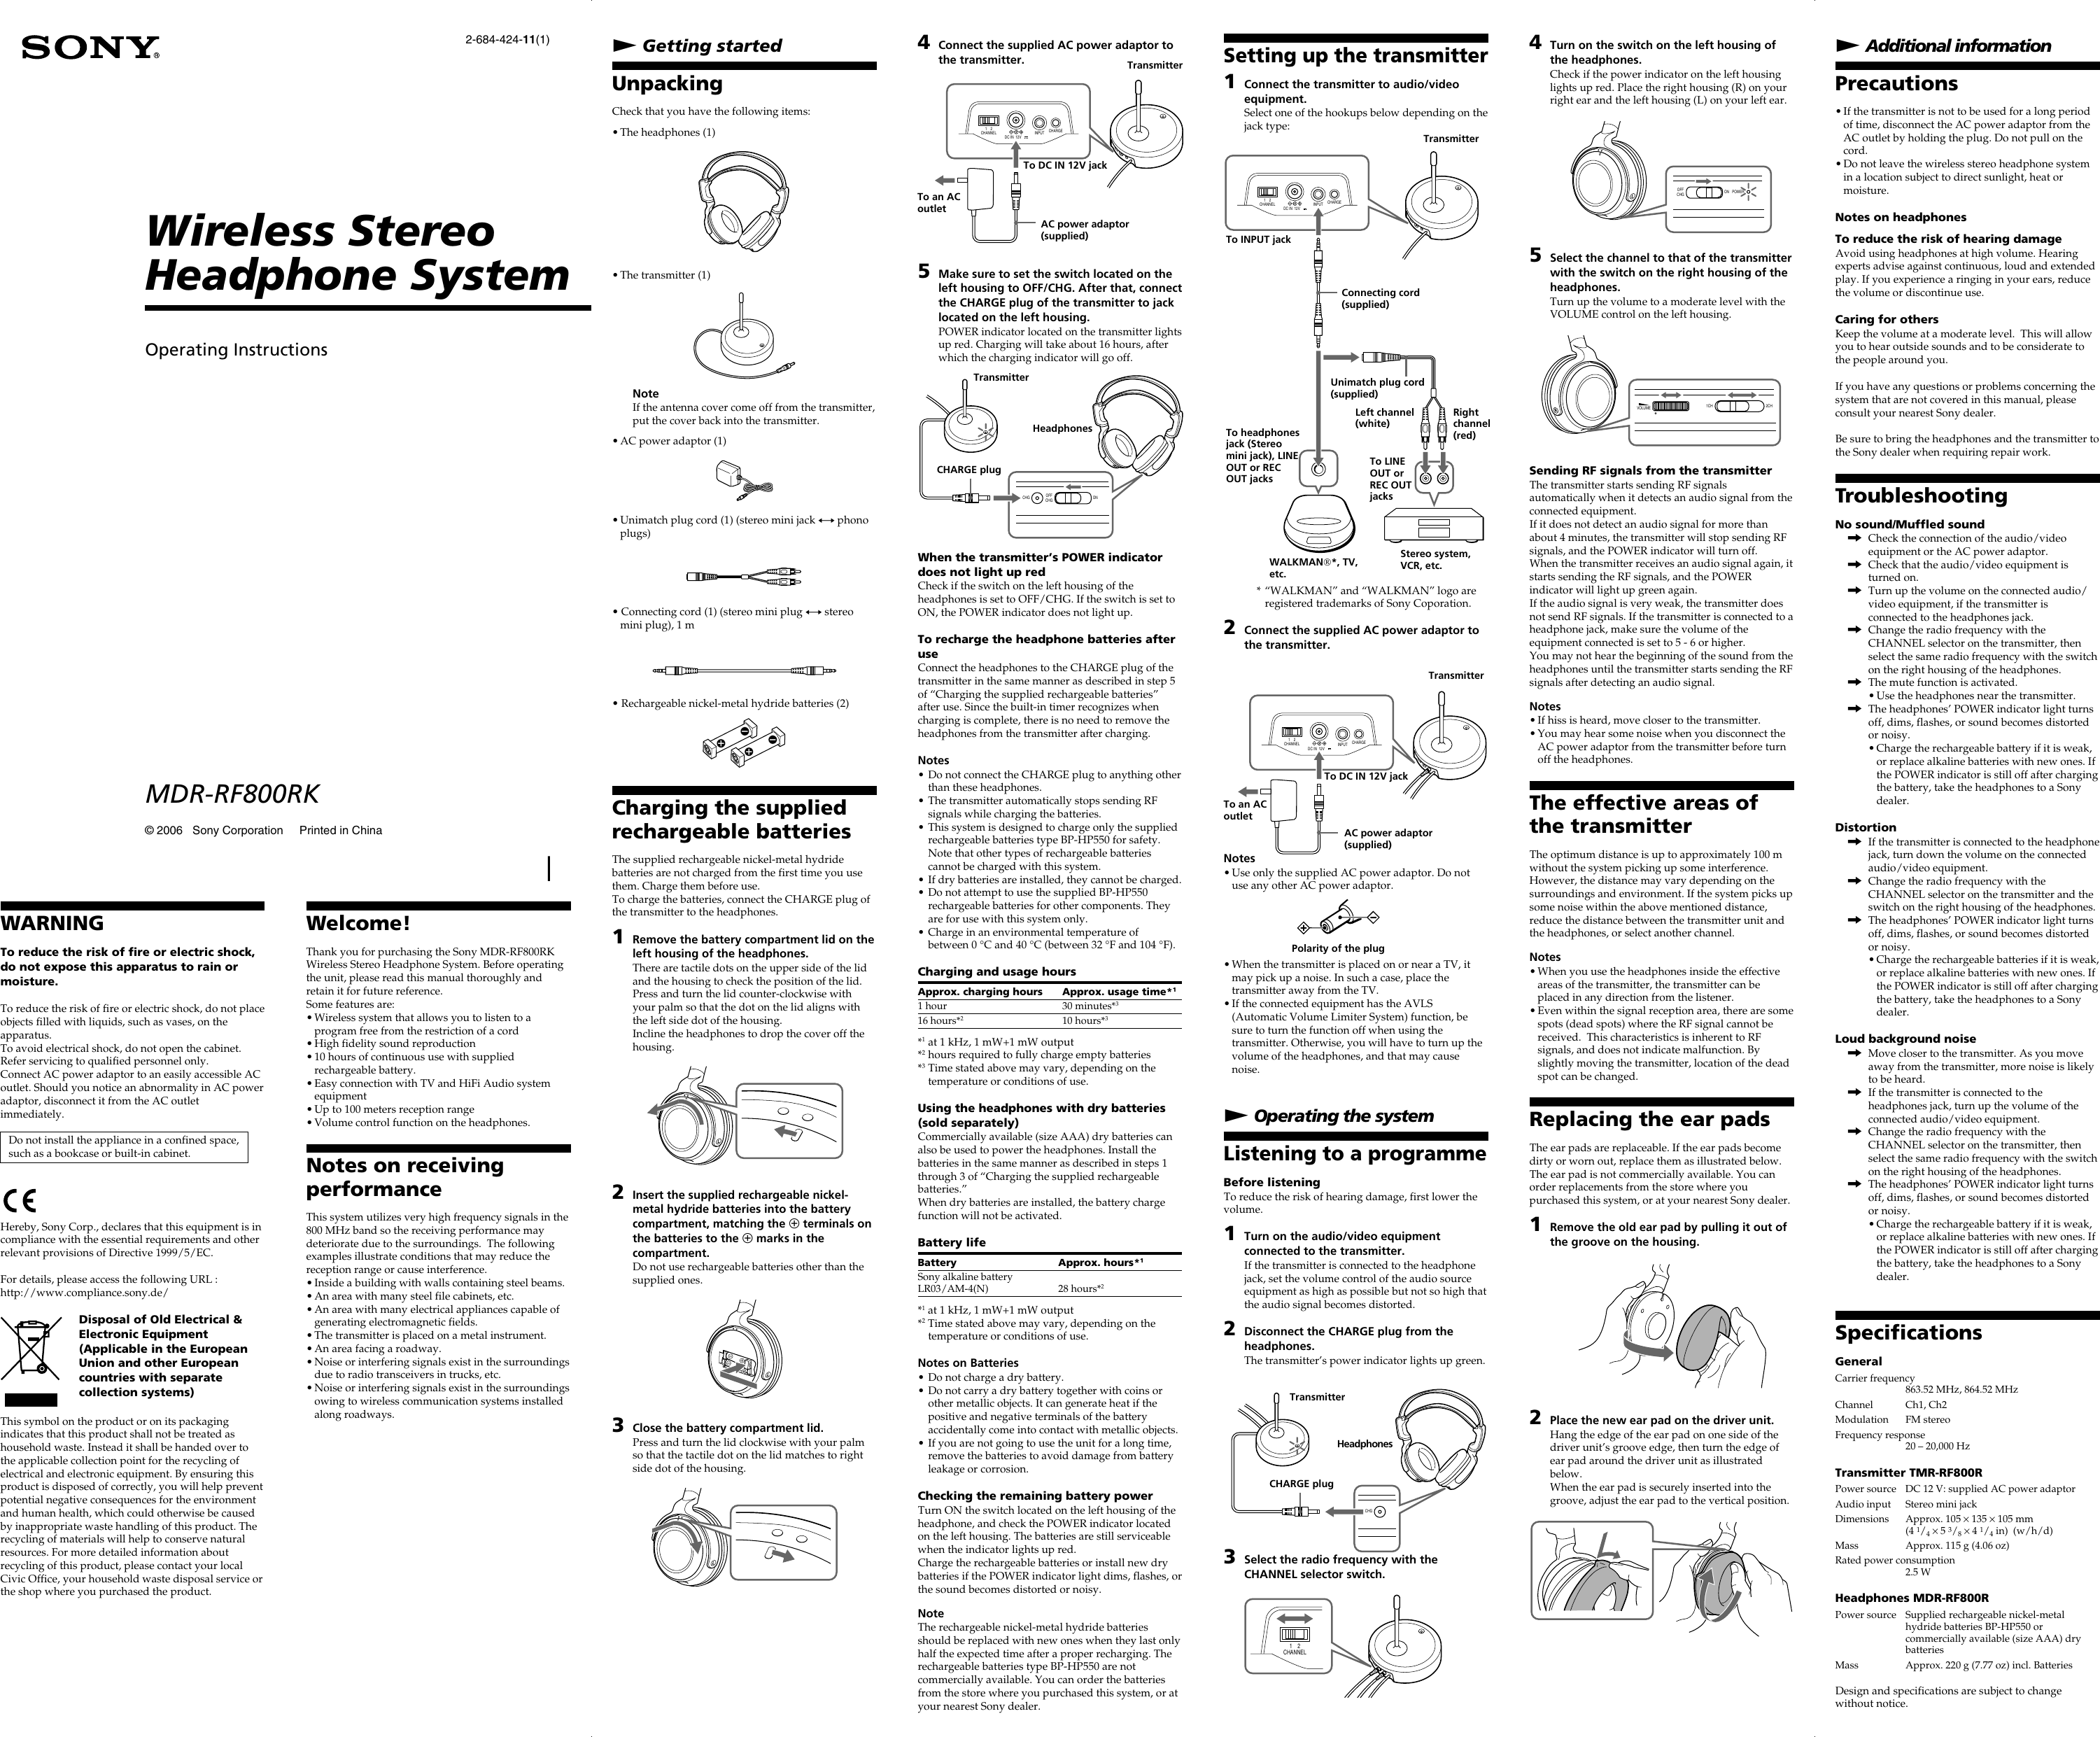 Page 1 of 2 - Sony Sony-Mdr-Rf800Rk-Users-Manual- MDR-RF800RK  Sony-mdr-rf800rk-users-manual